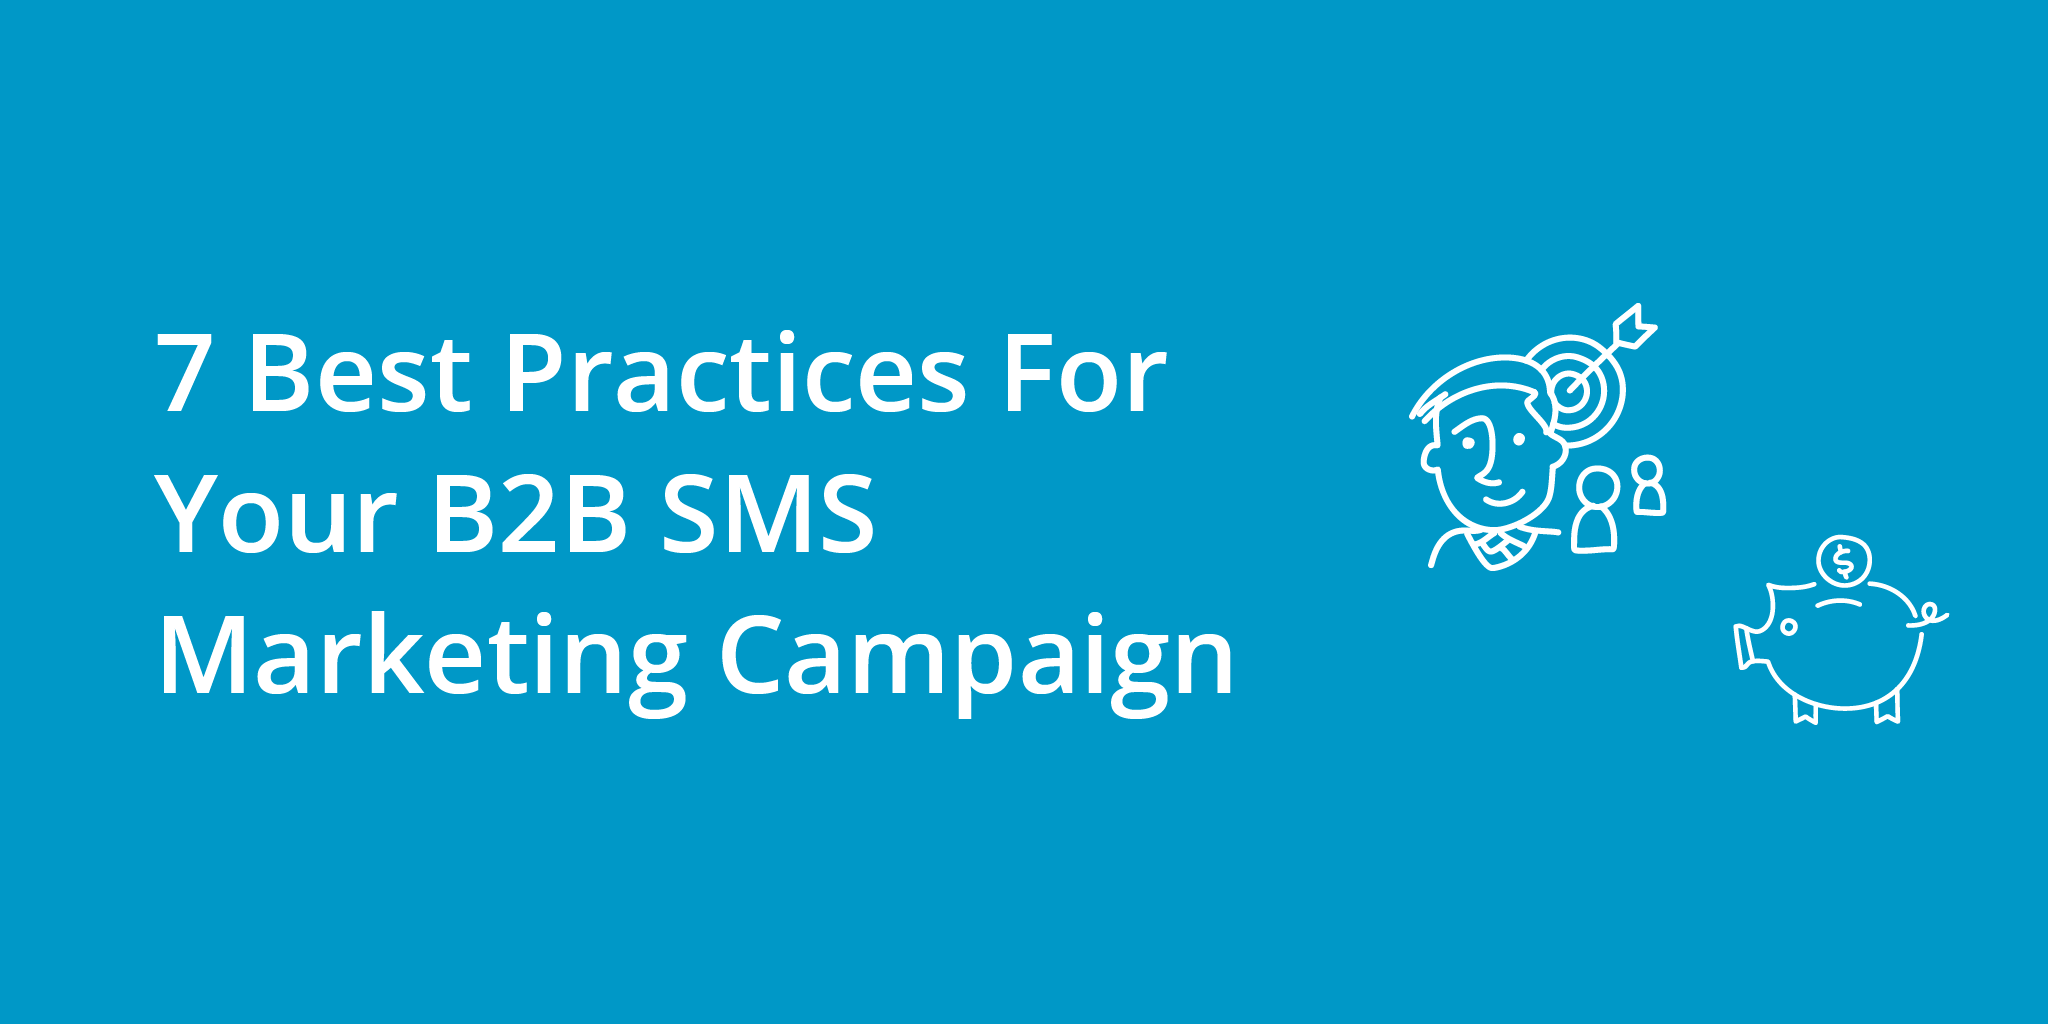 7 Best Practices For Your B2B SMS Marketing Campaign | Telephones for business